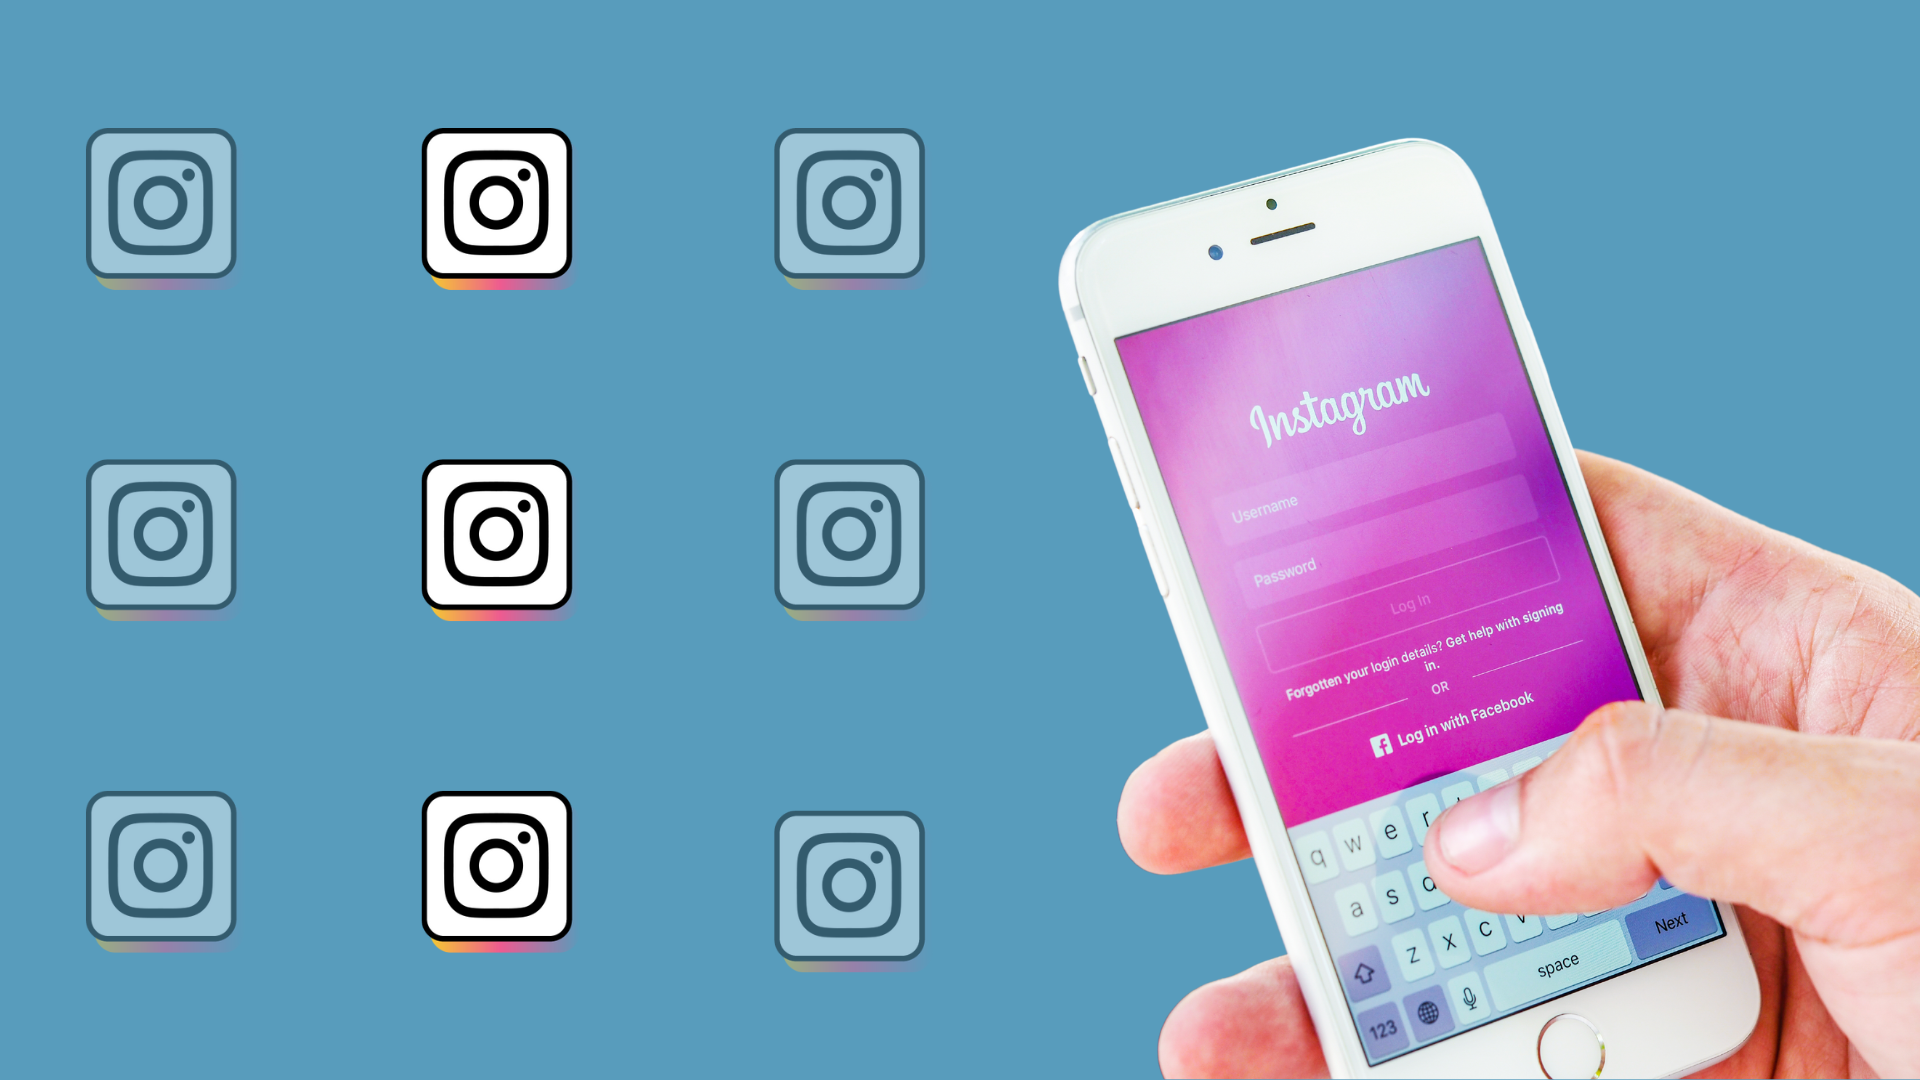 How to Log In to Your Instagram Account Step-by-Step